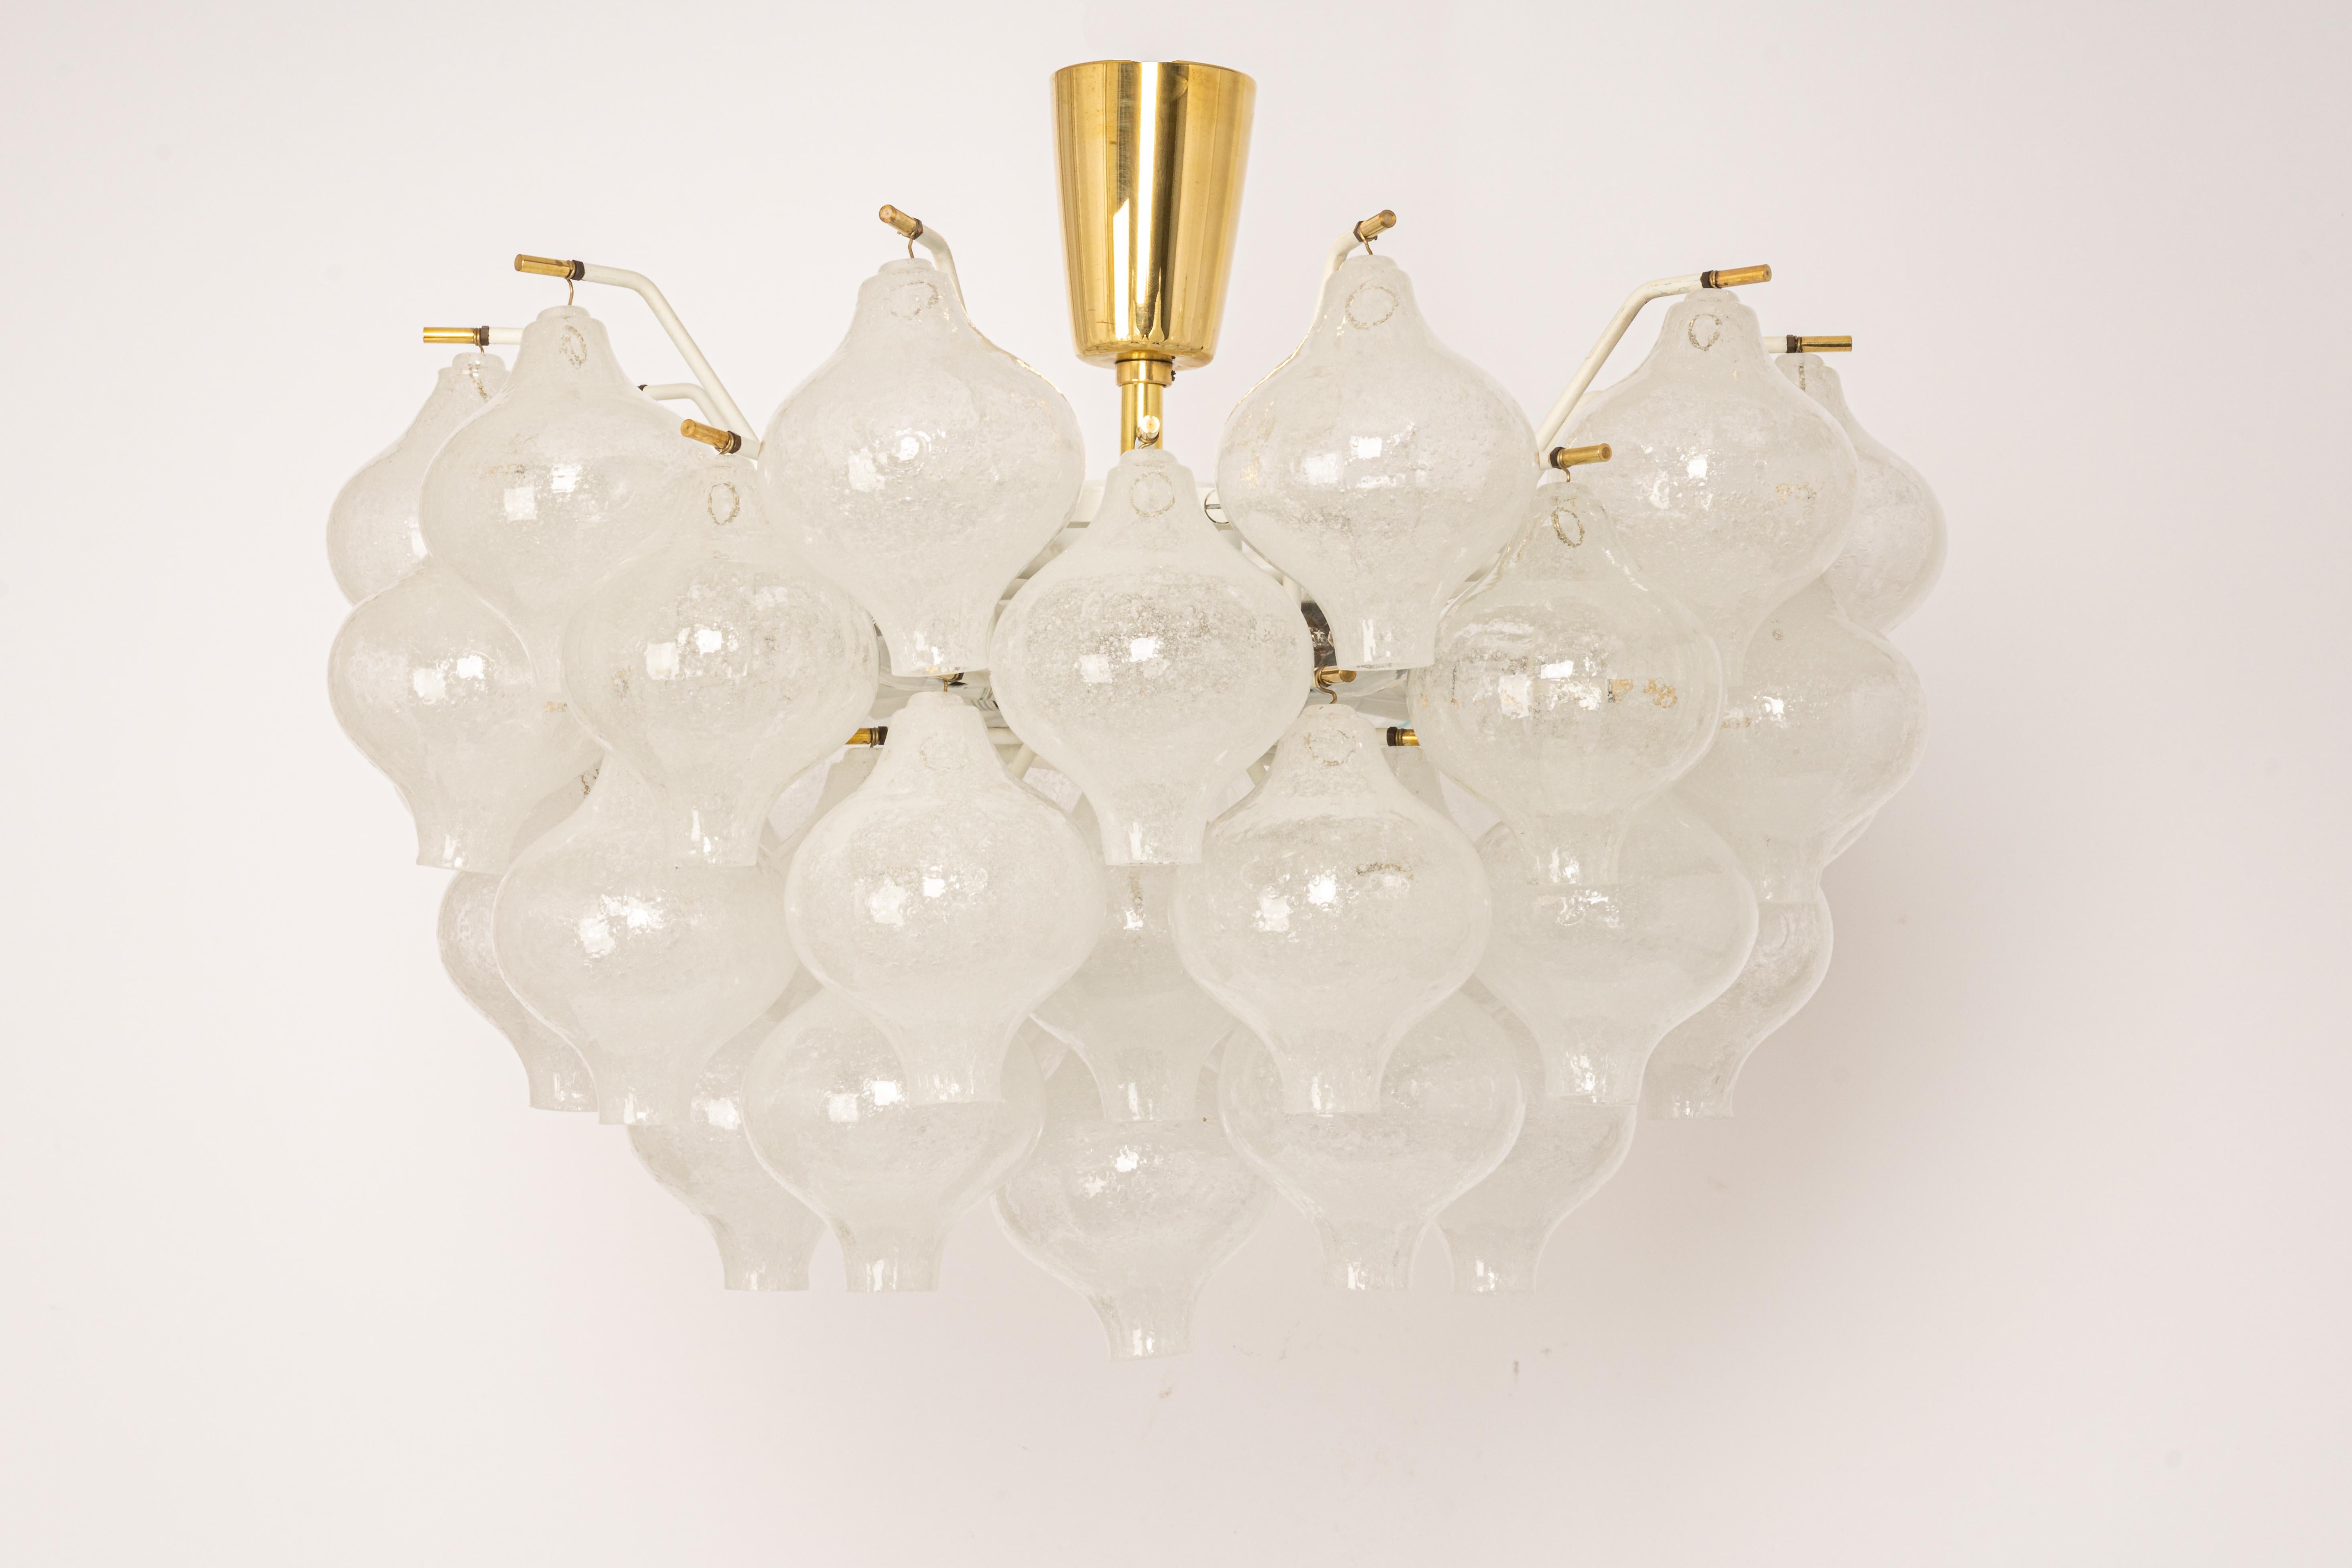 Wonderful onion-shaped -Tulipan glass chandelier or flush mount. A large number of hand-blown glasses are suspended on a white-painted metal frame and brass center rod.
Best of design from the 1960s by Kalmar, Austria. High quality of the